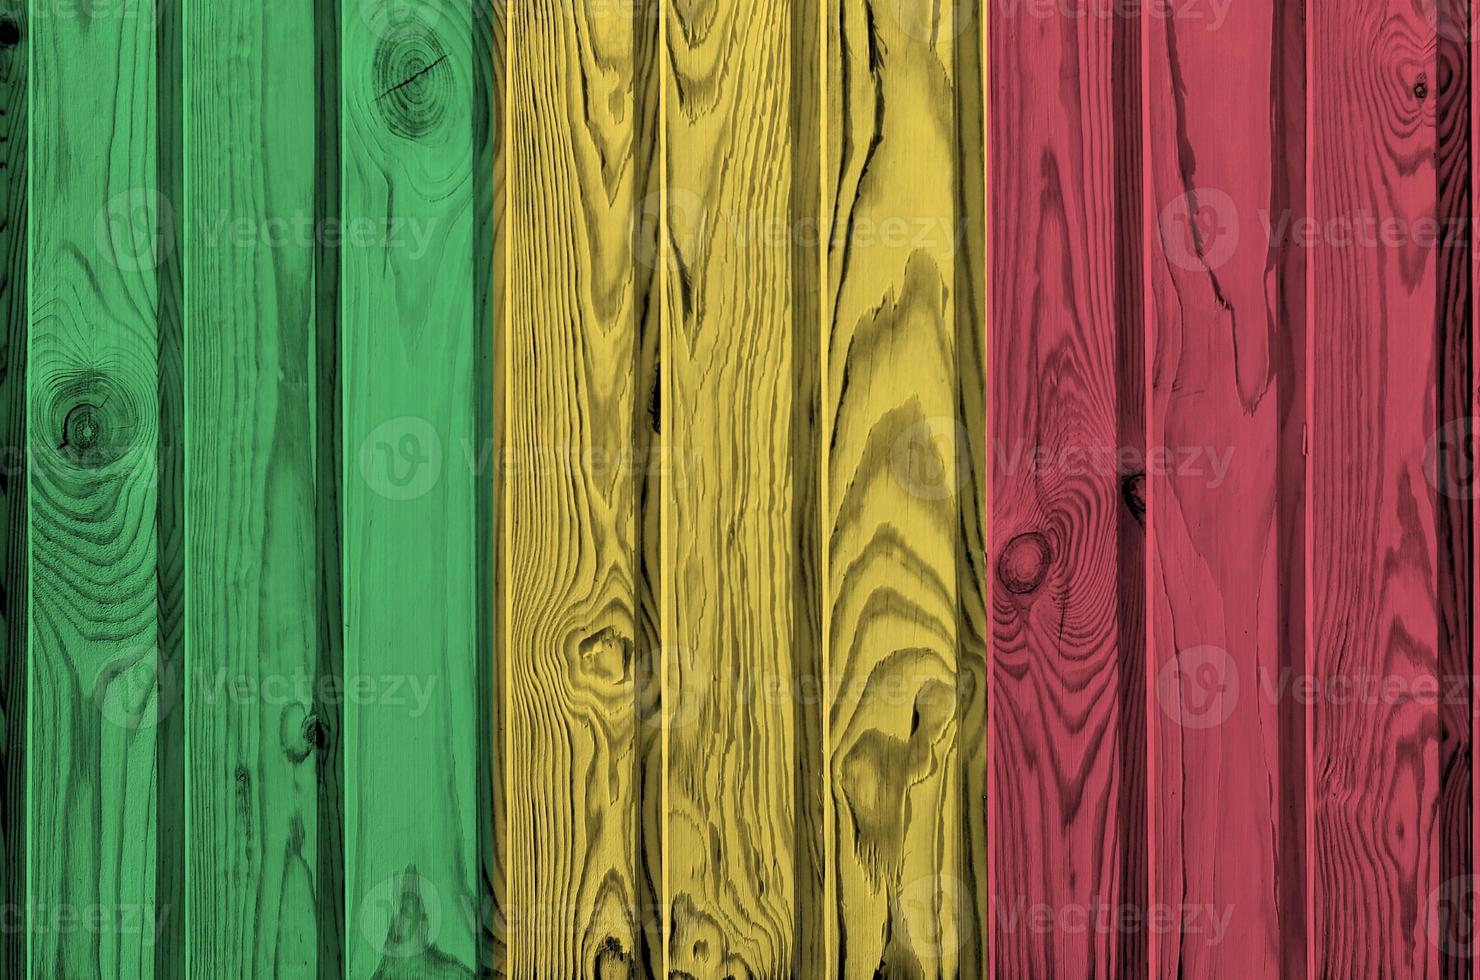 Mali flag depicted in bright paint colors on old wooden wall. Textured banner on rough background photo